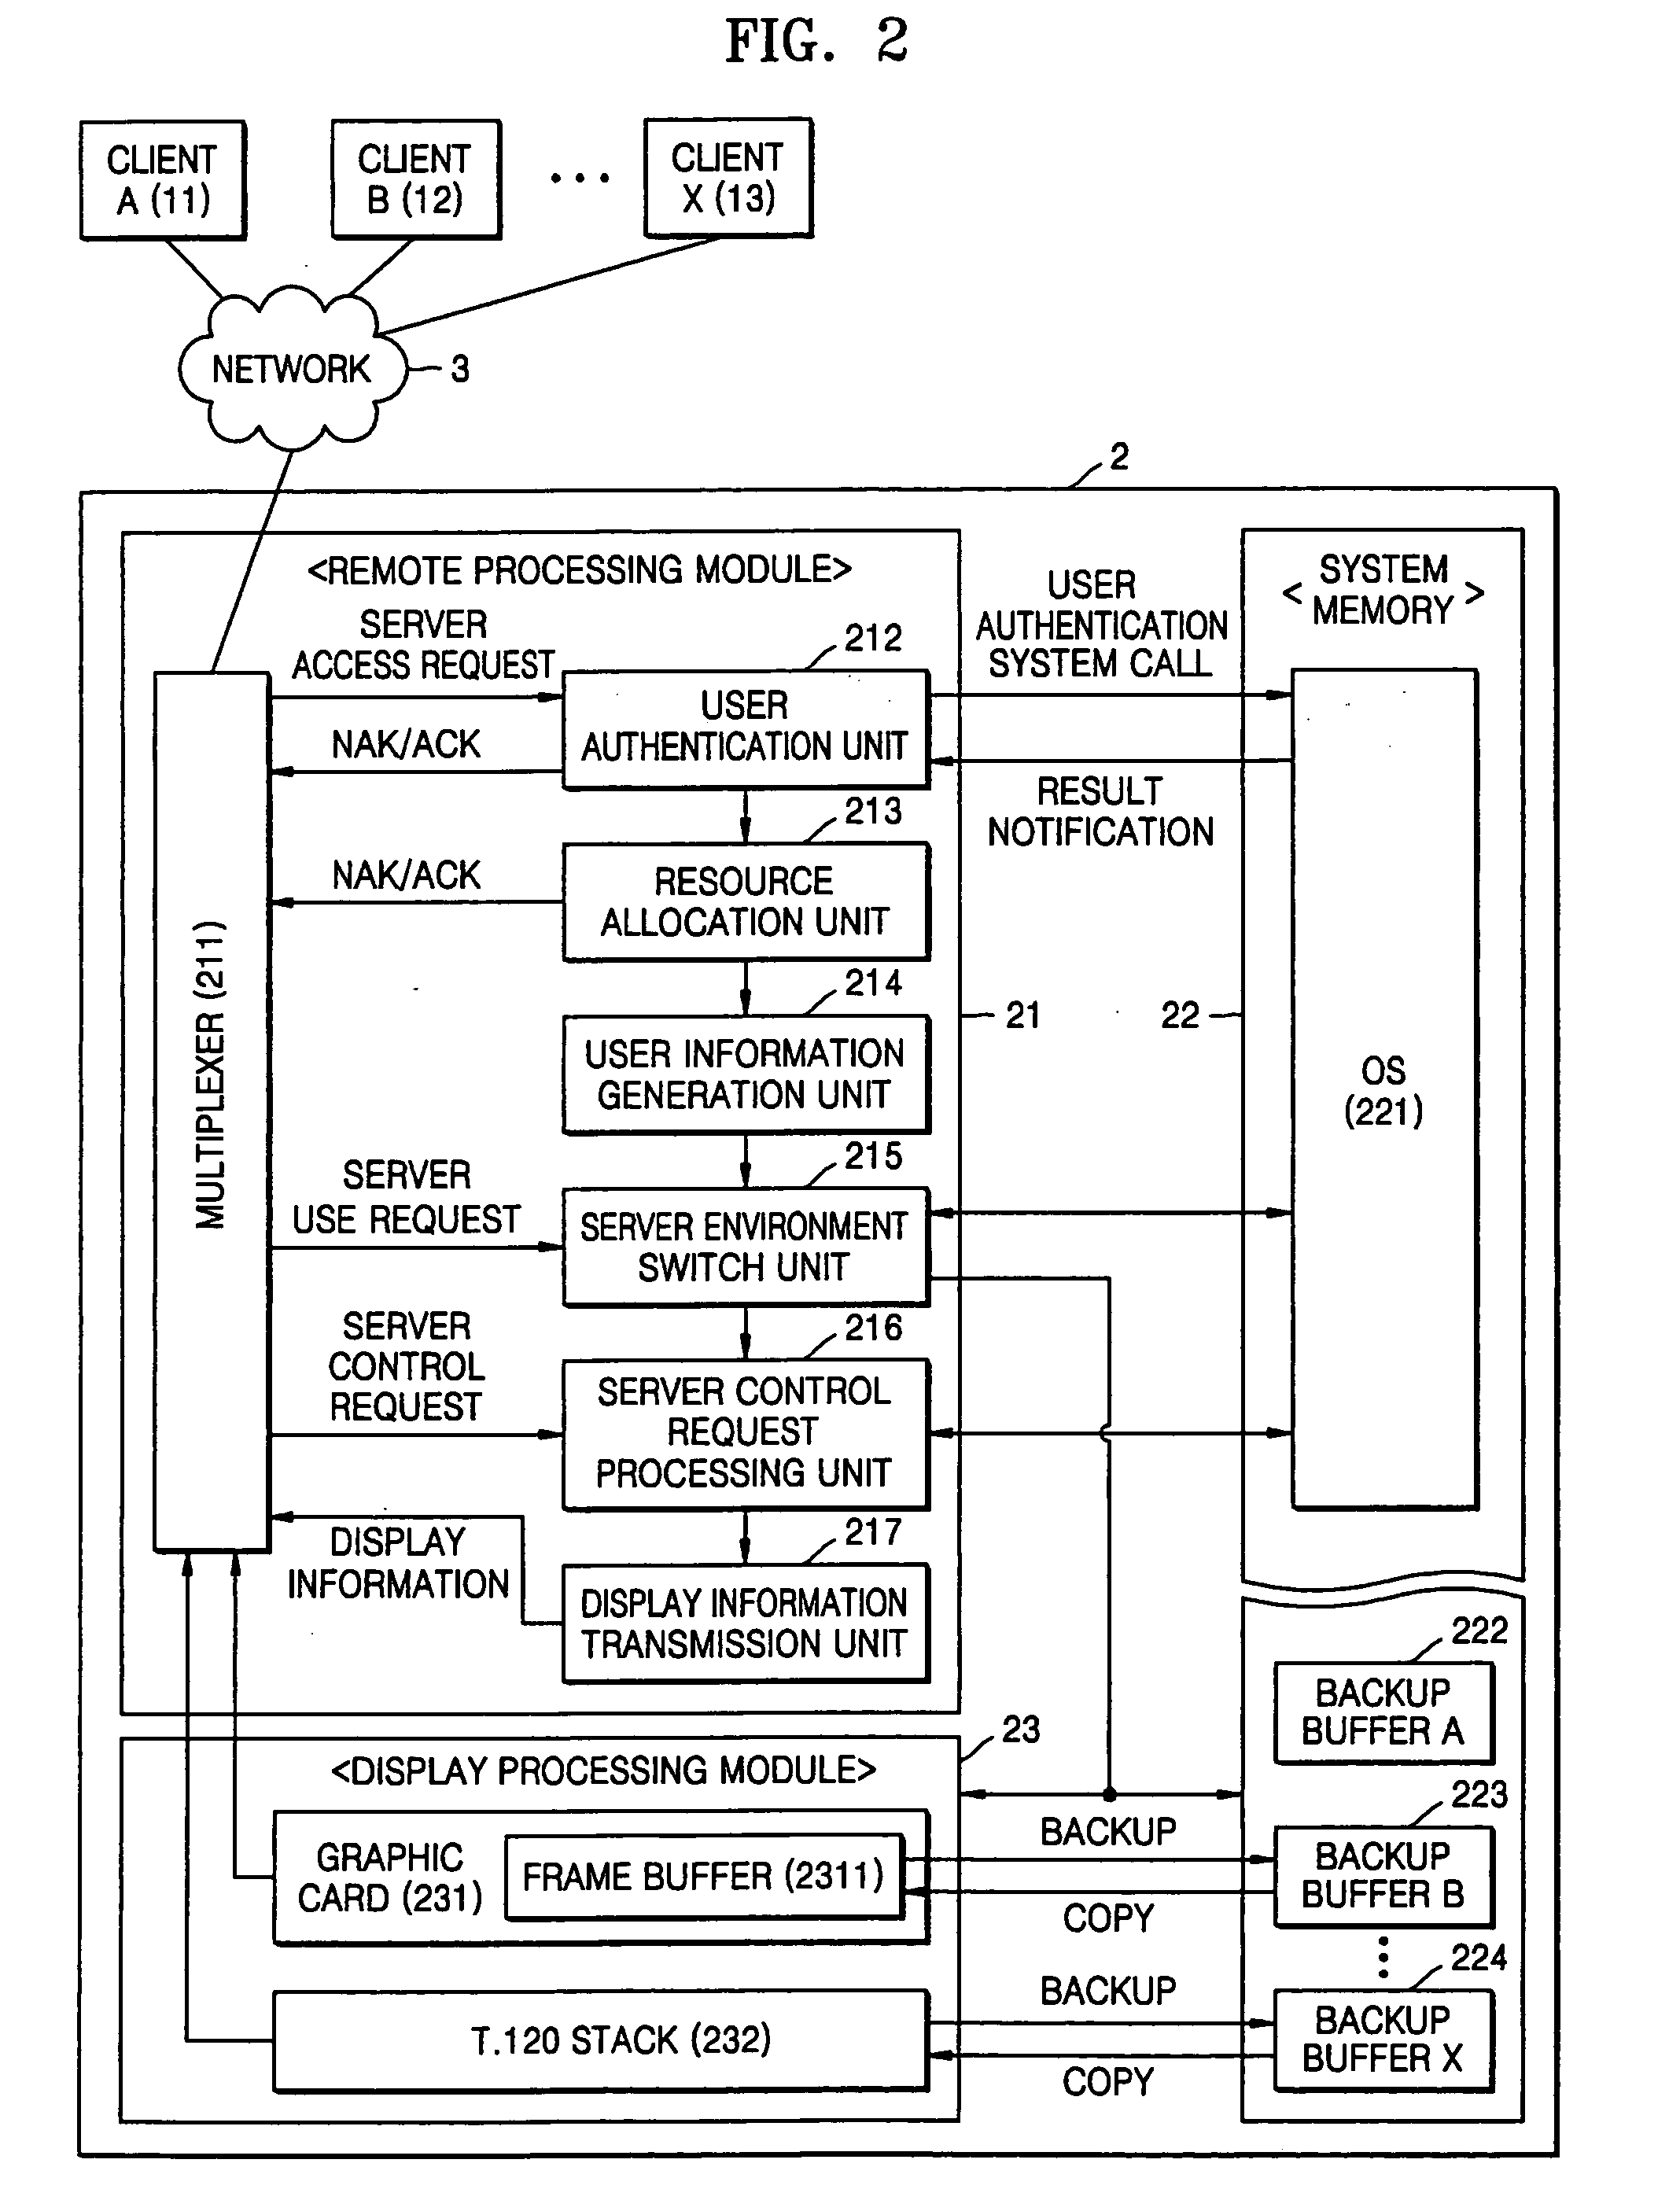 Method, apparatus, and medium for servicing clients in remote areas